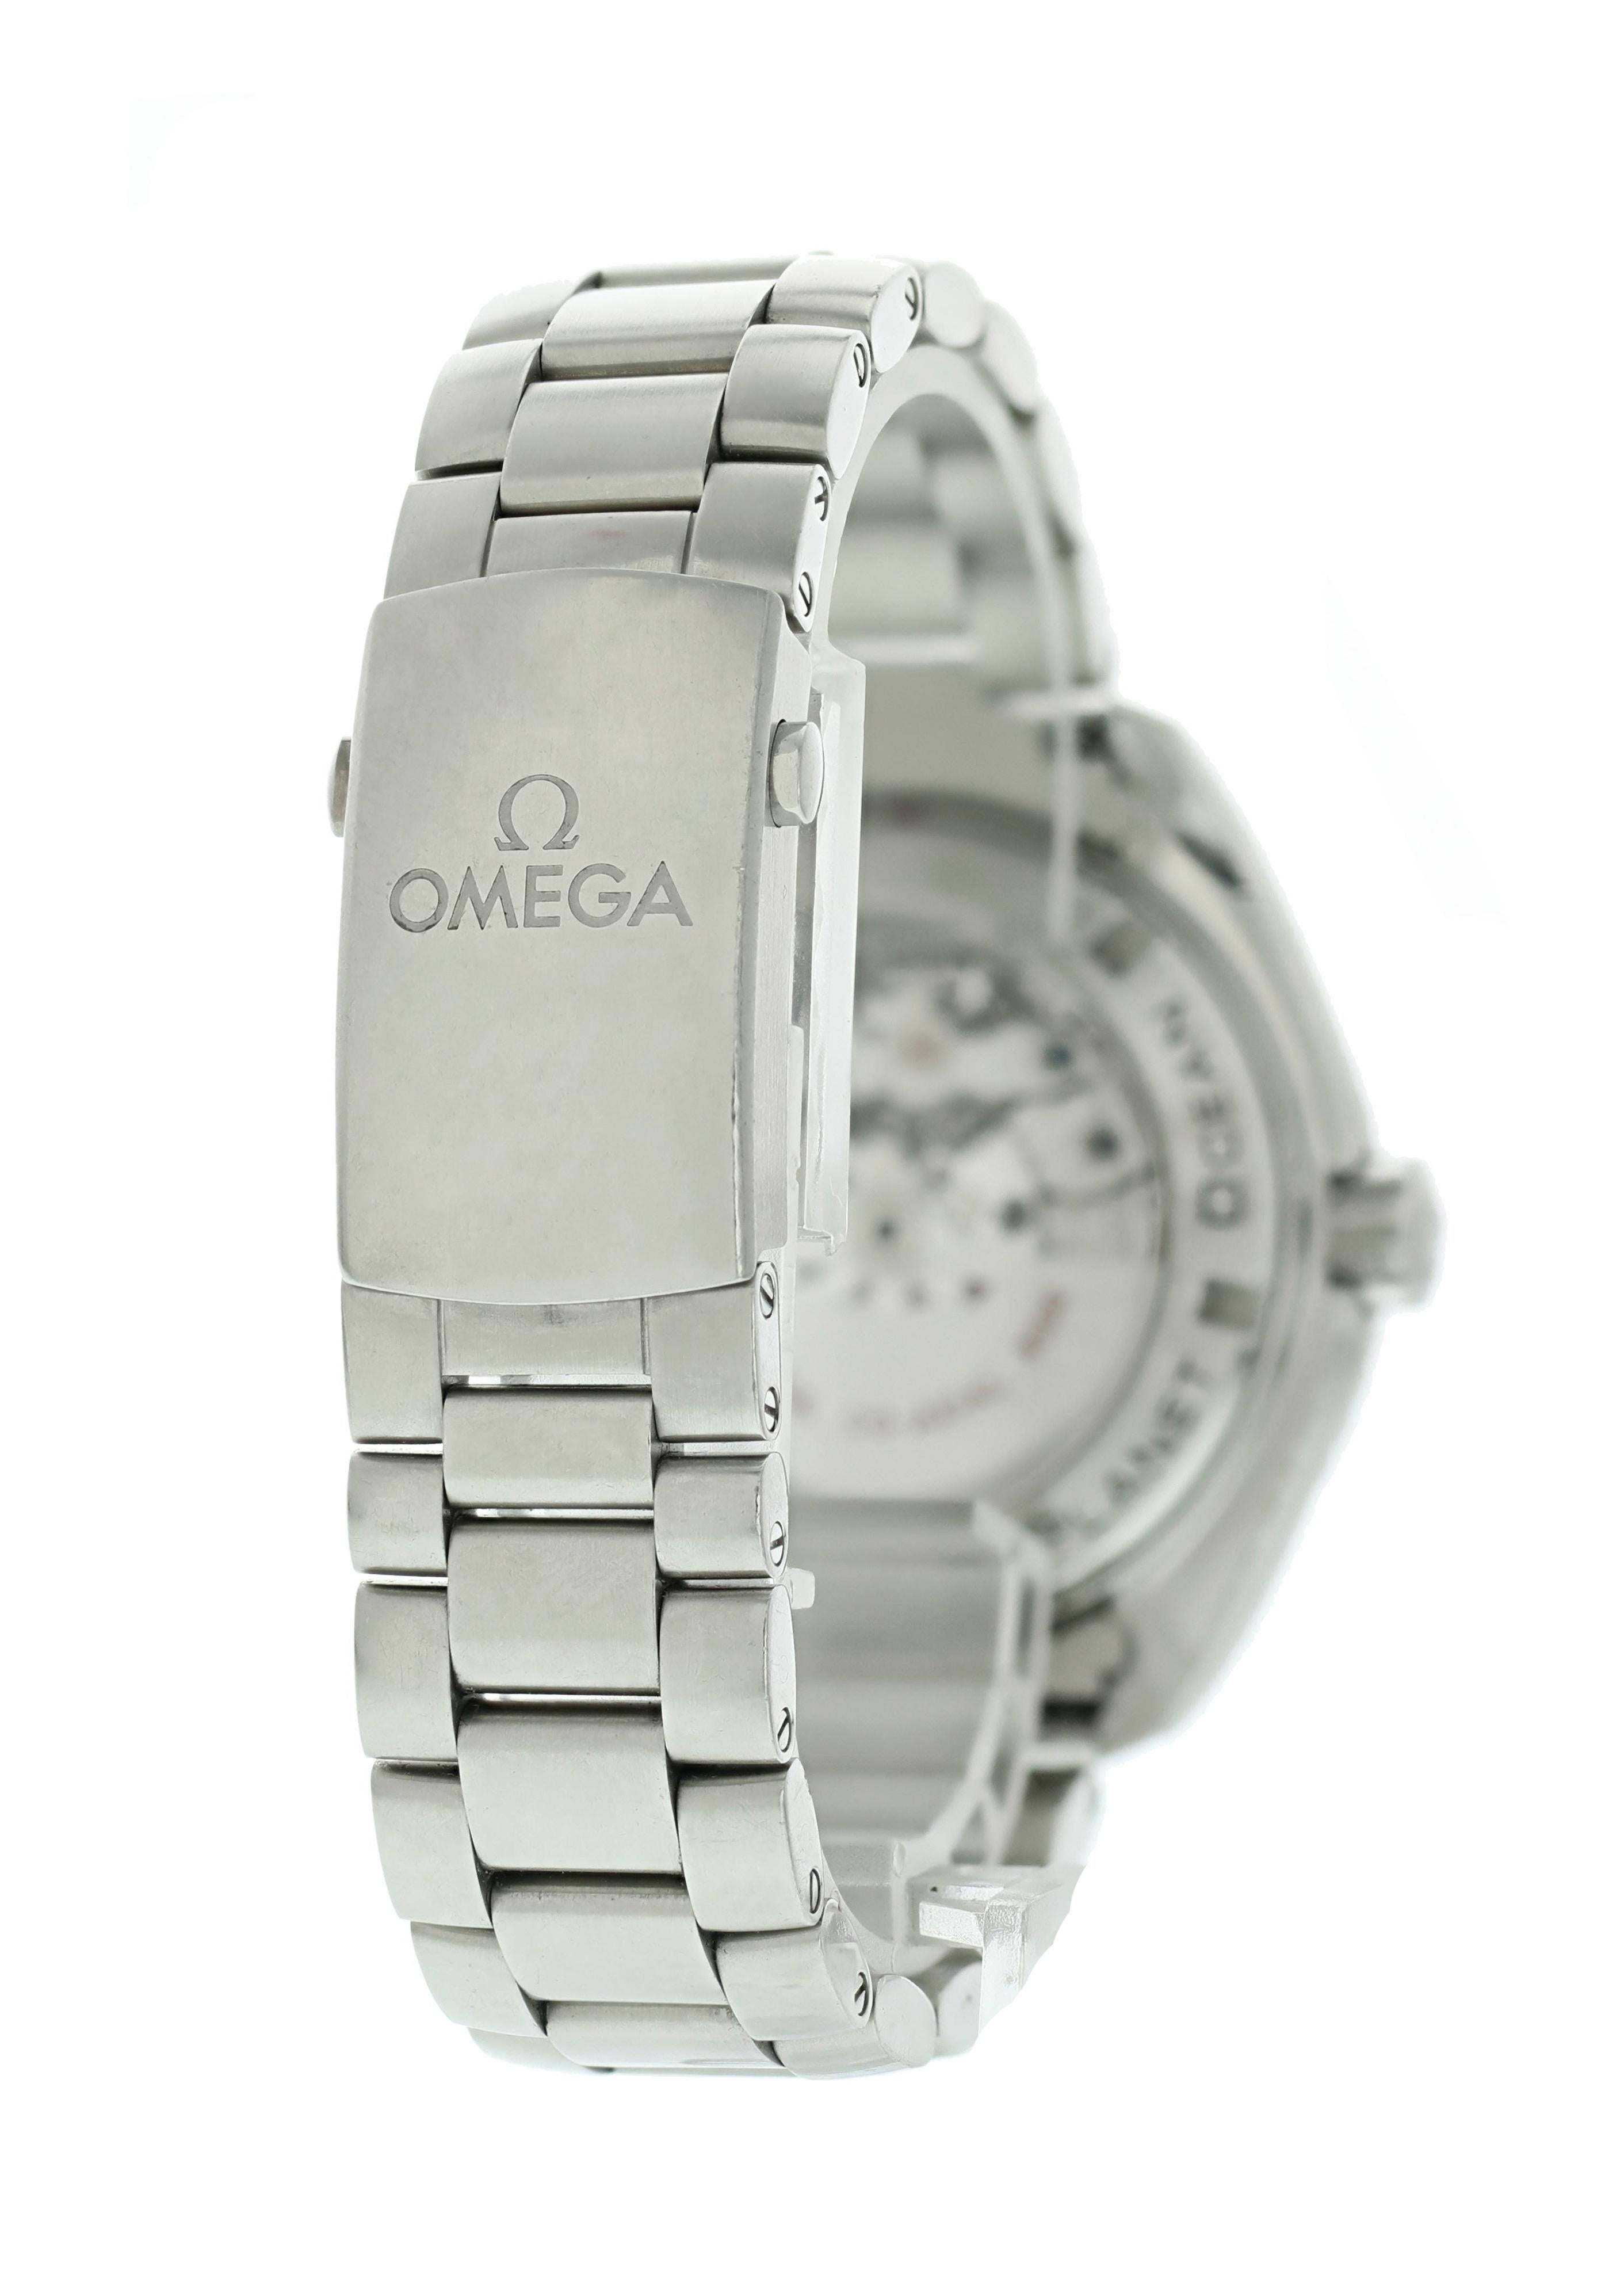 Men's Omega Seamaster Planet Ocean 232.30.46.21.01.003 Co-Axial Men’s Watch For Sale